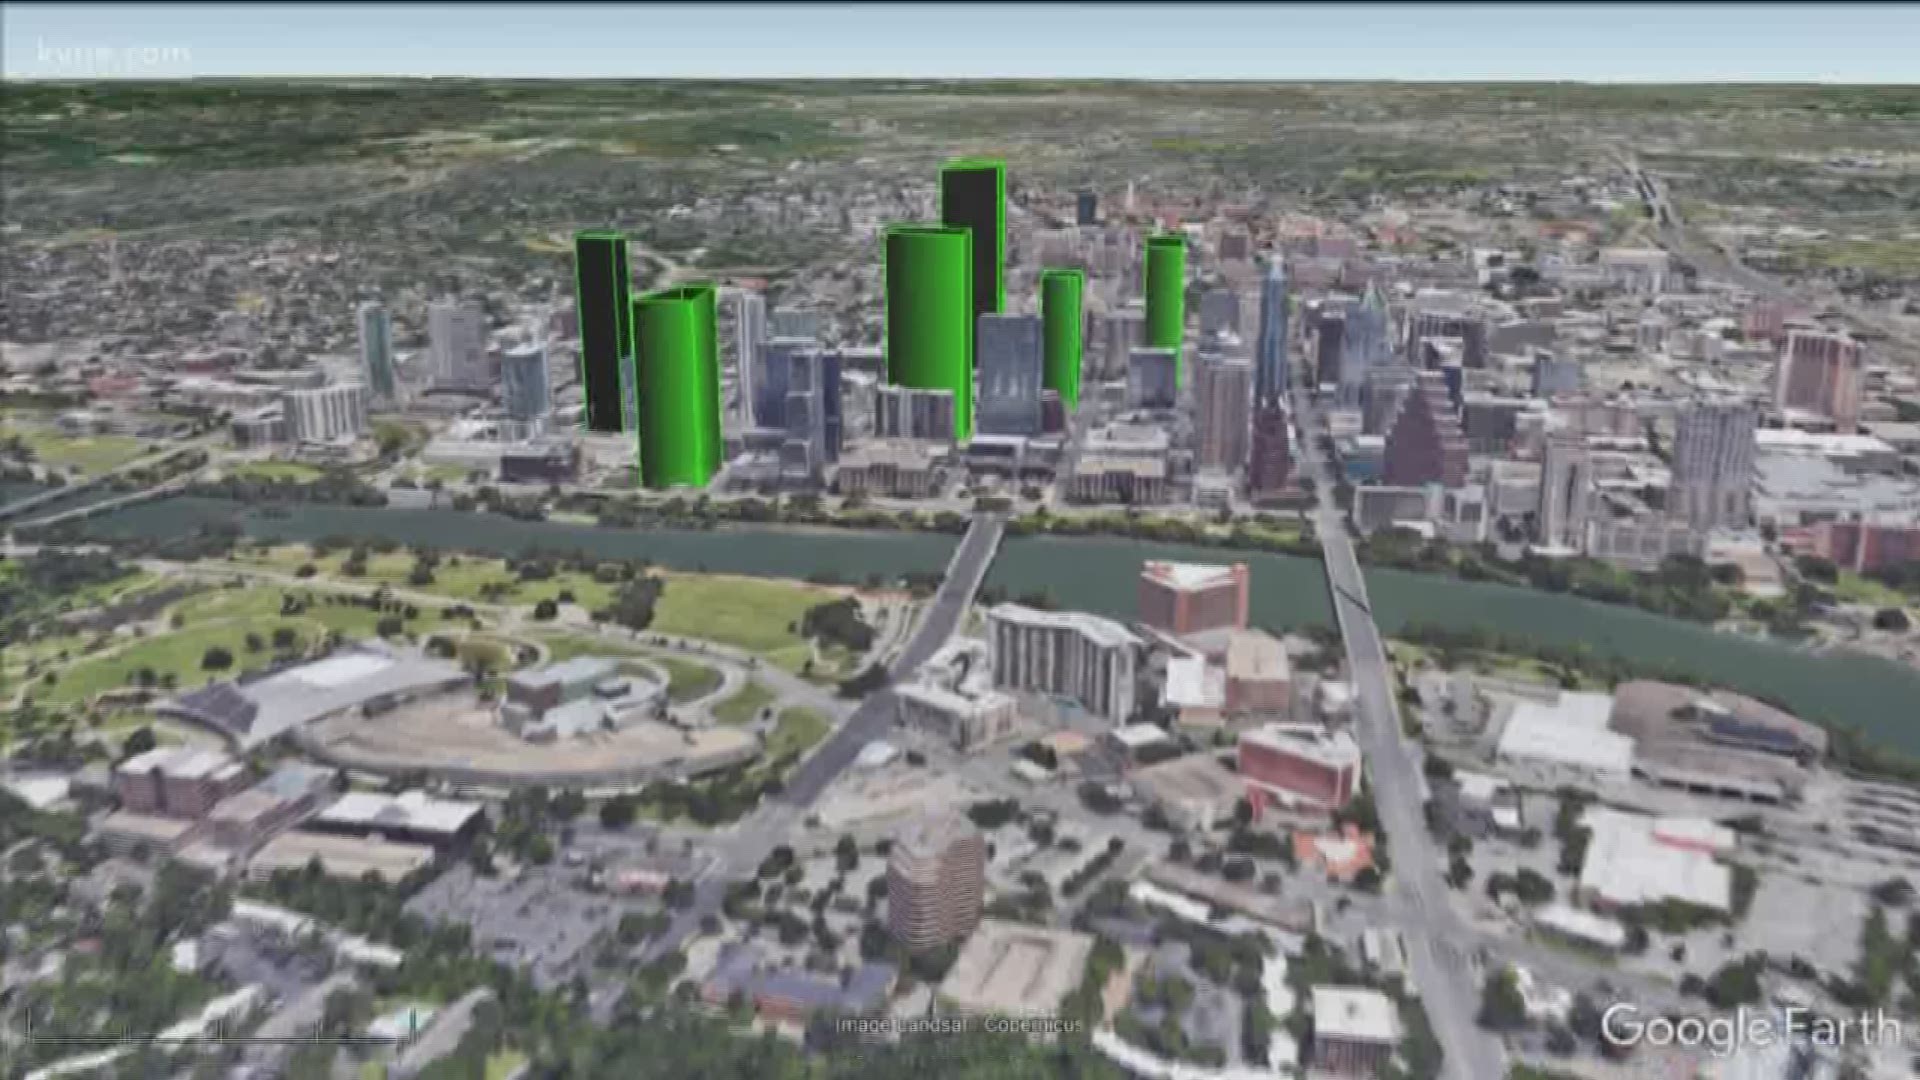 Five new high rises will soon change the Austin skyline as we know it.